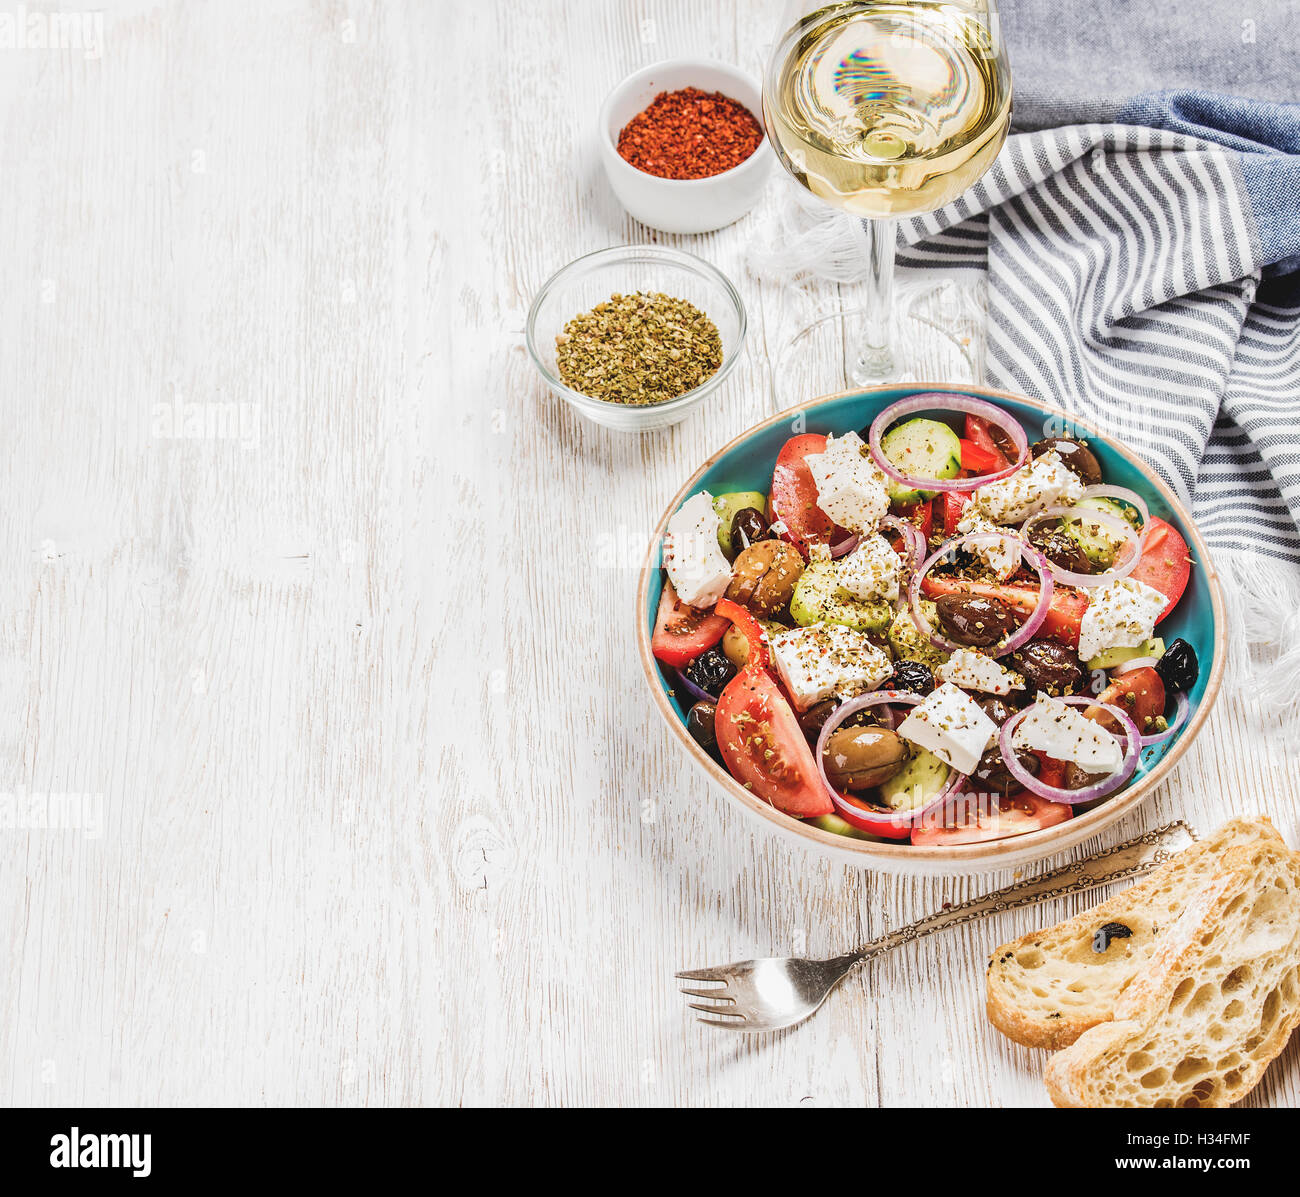 Greek salad with bread, herbs and glass of white wine Stock Photo